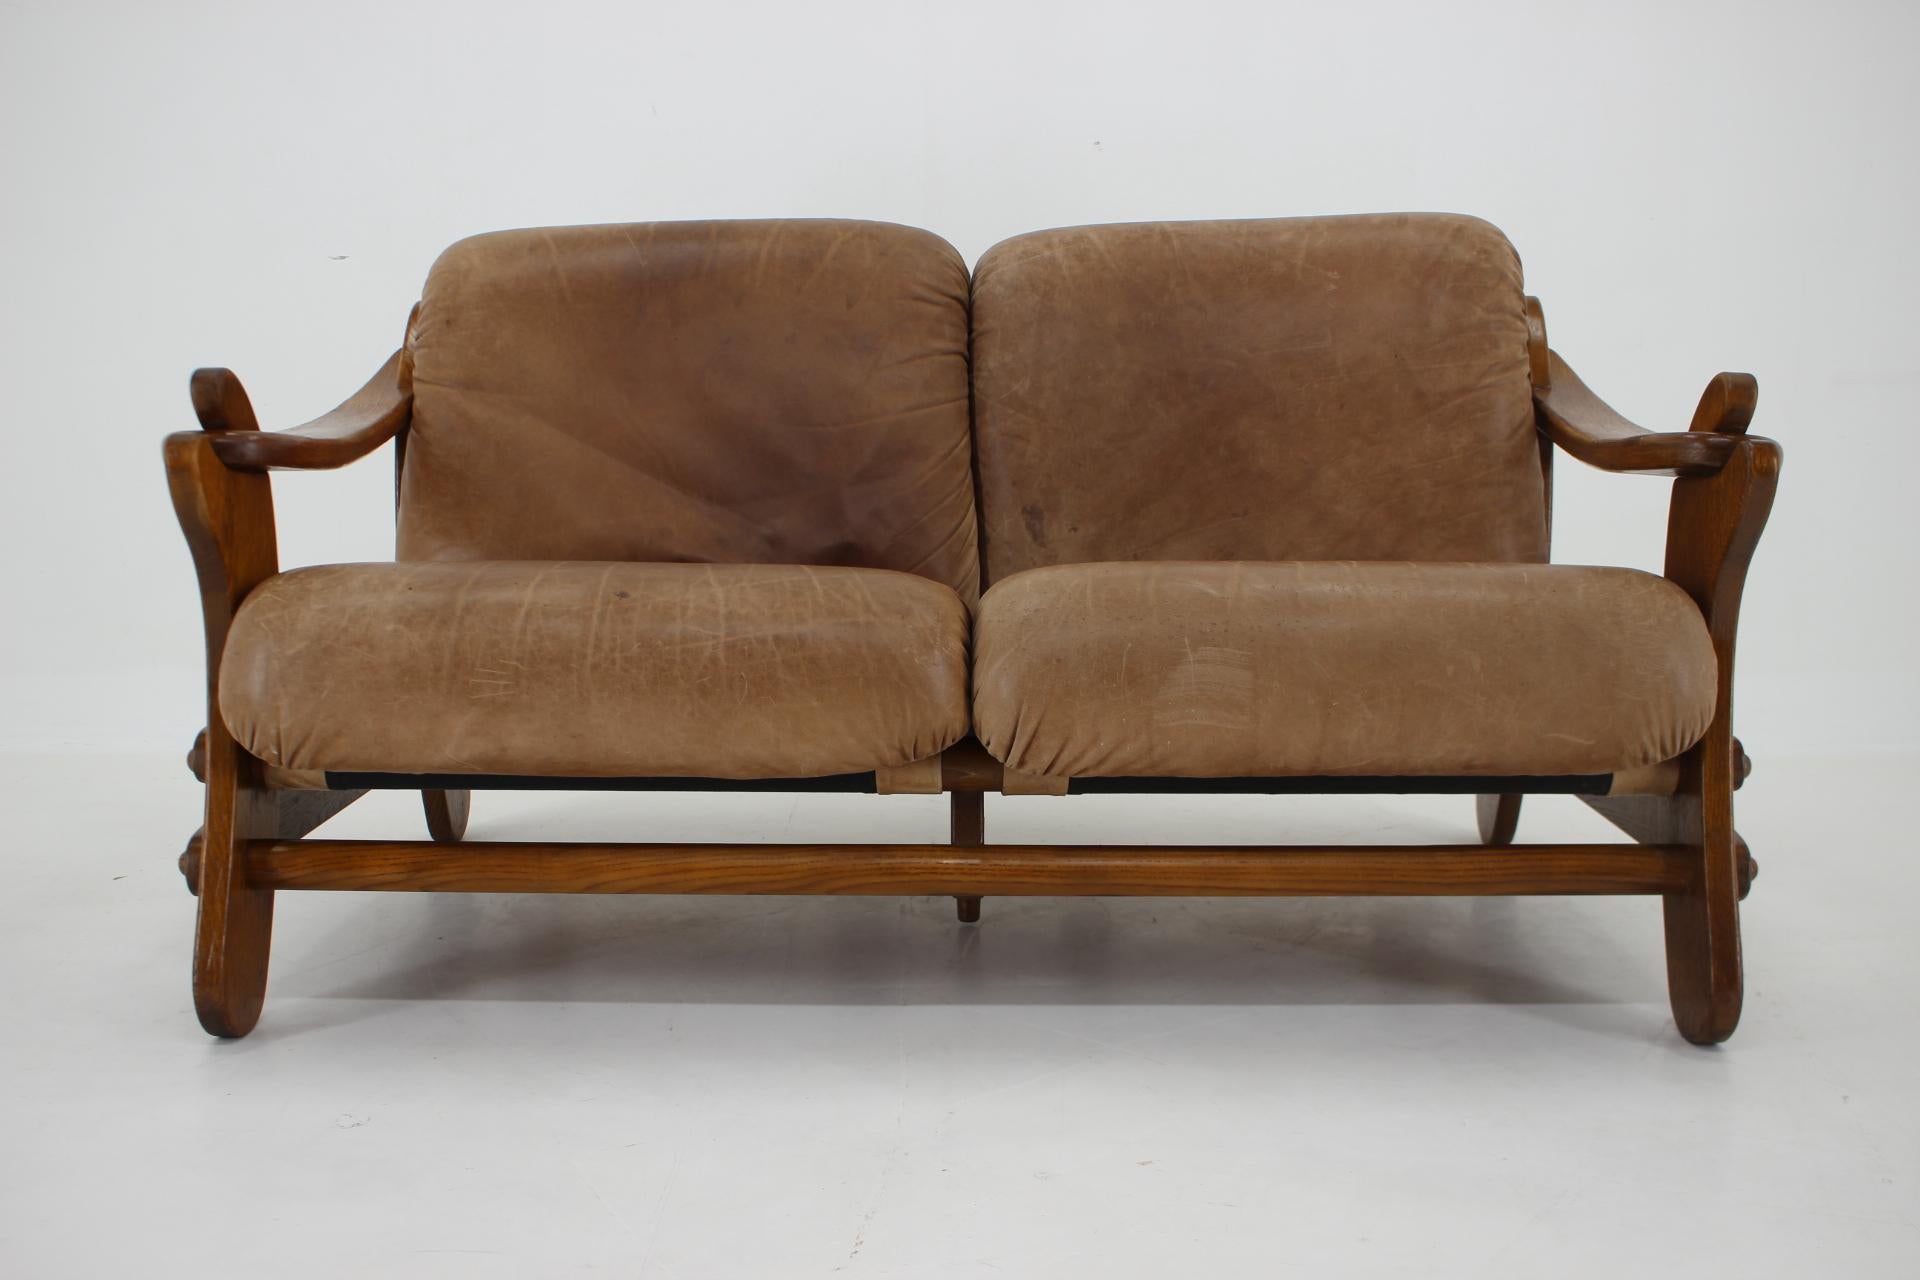 - good original condition 
- sturdy and stable 
- patinated leather.